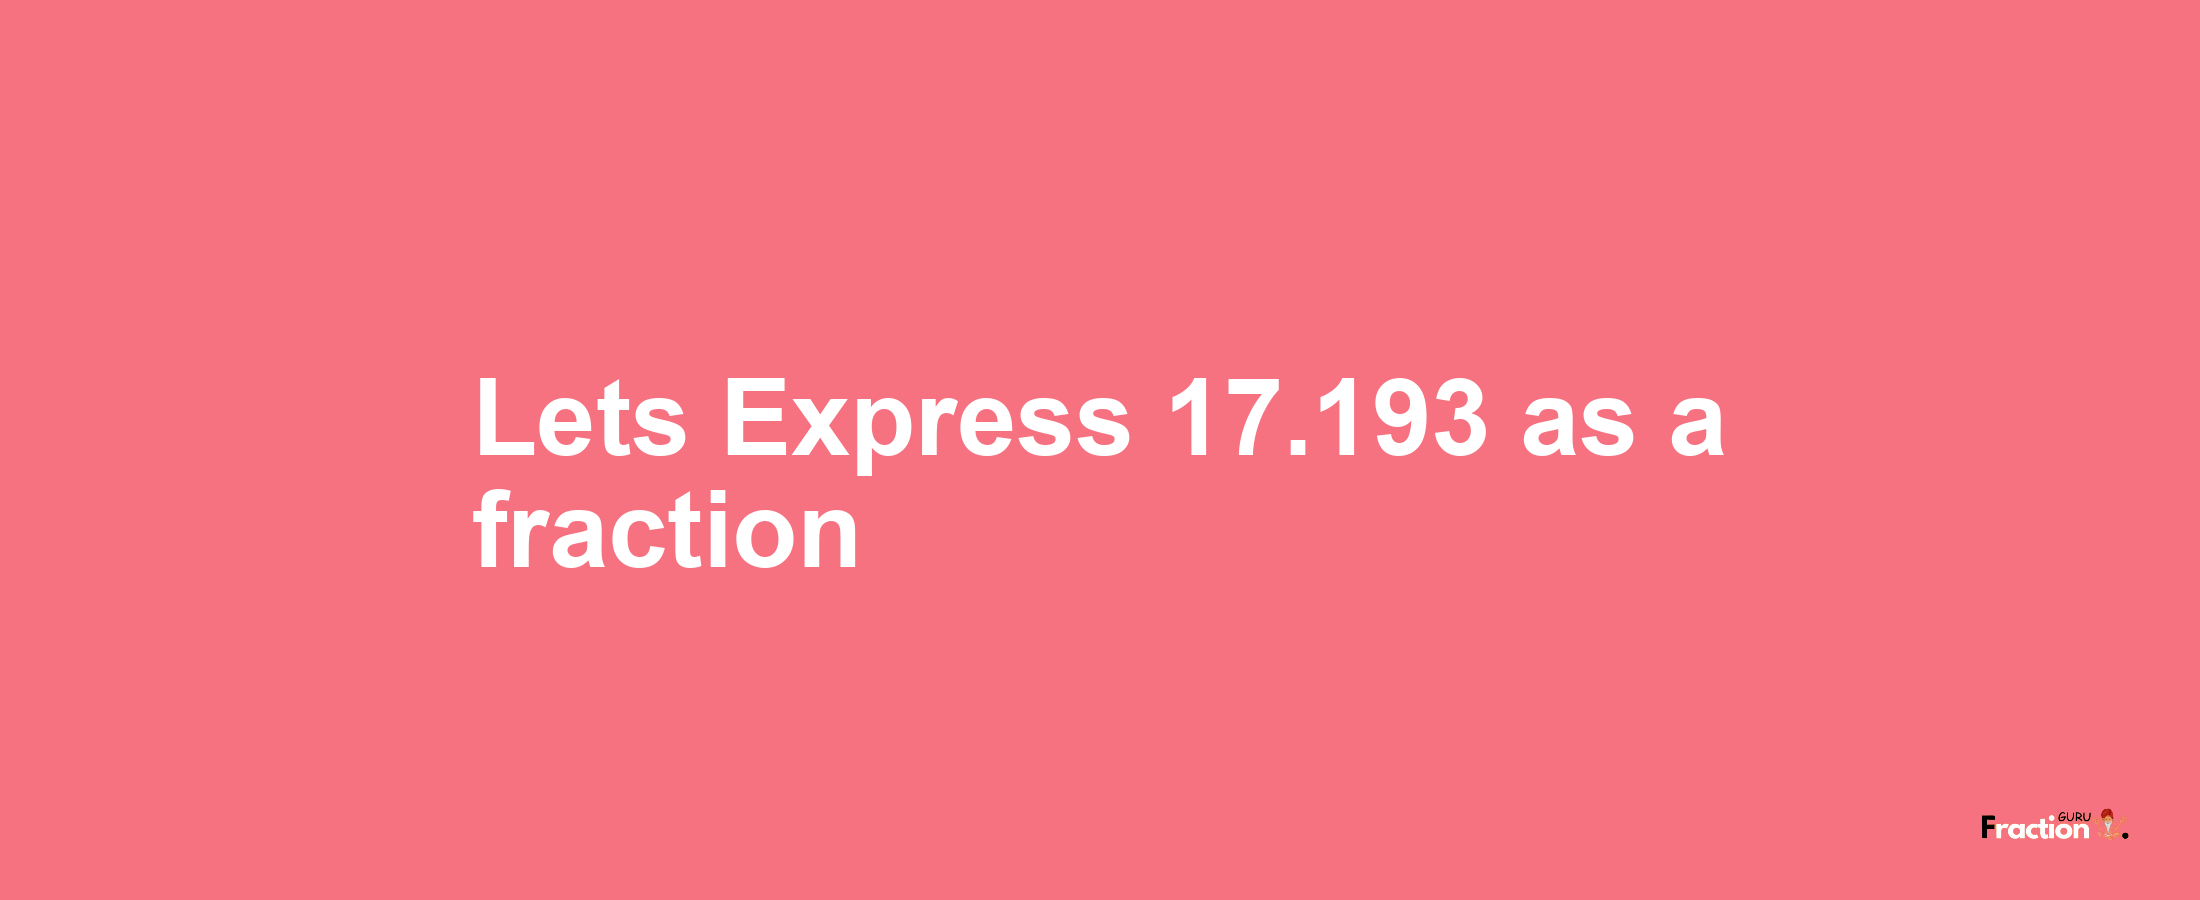 Lets Express 17.193 as afraction